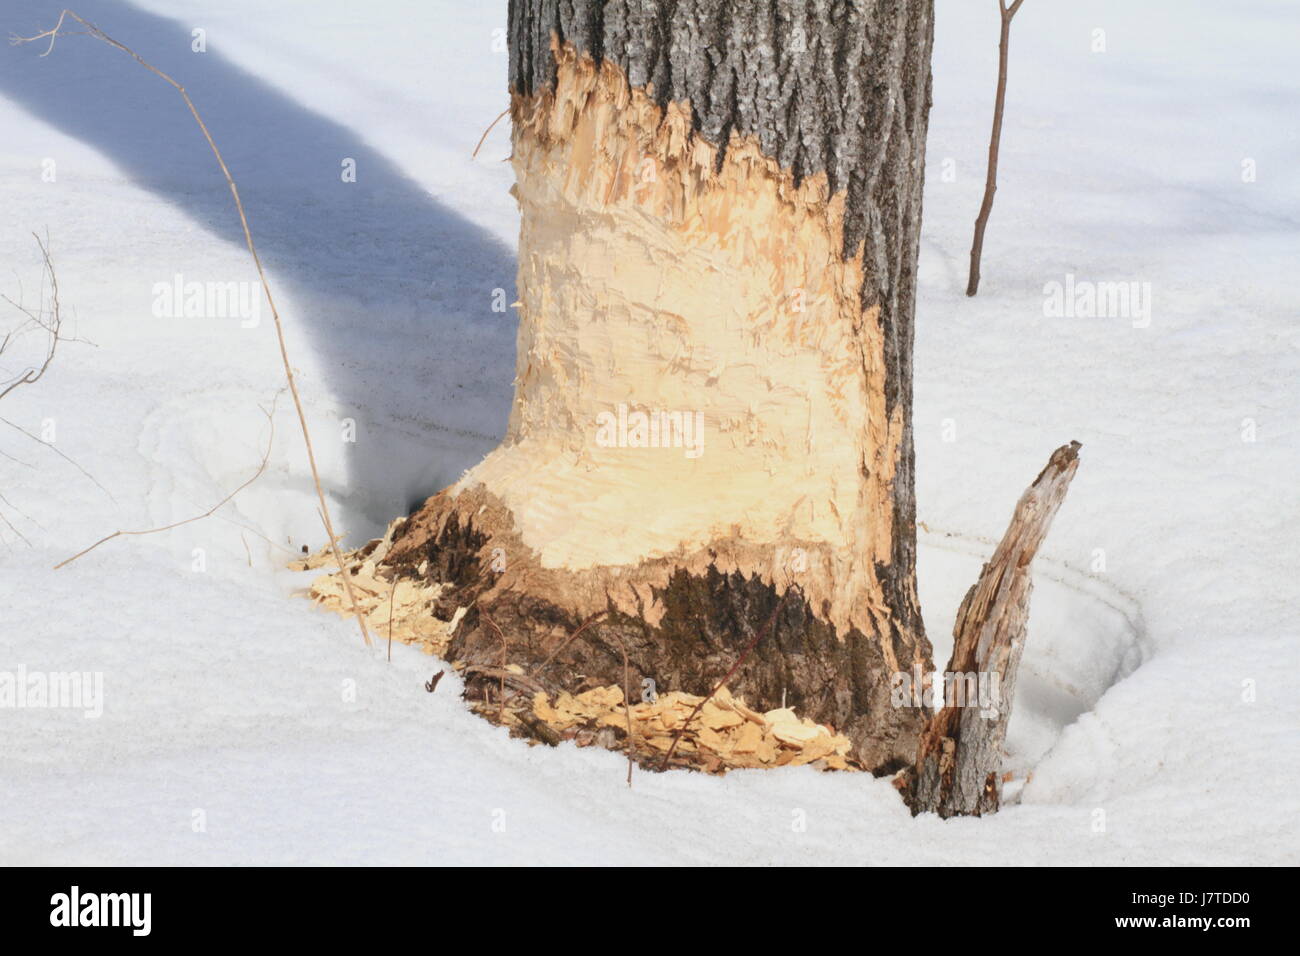 Quebec,Canada. A beaver chewed tree in the winter Stock Photo